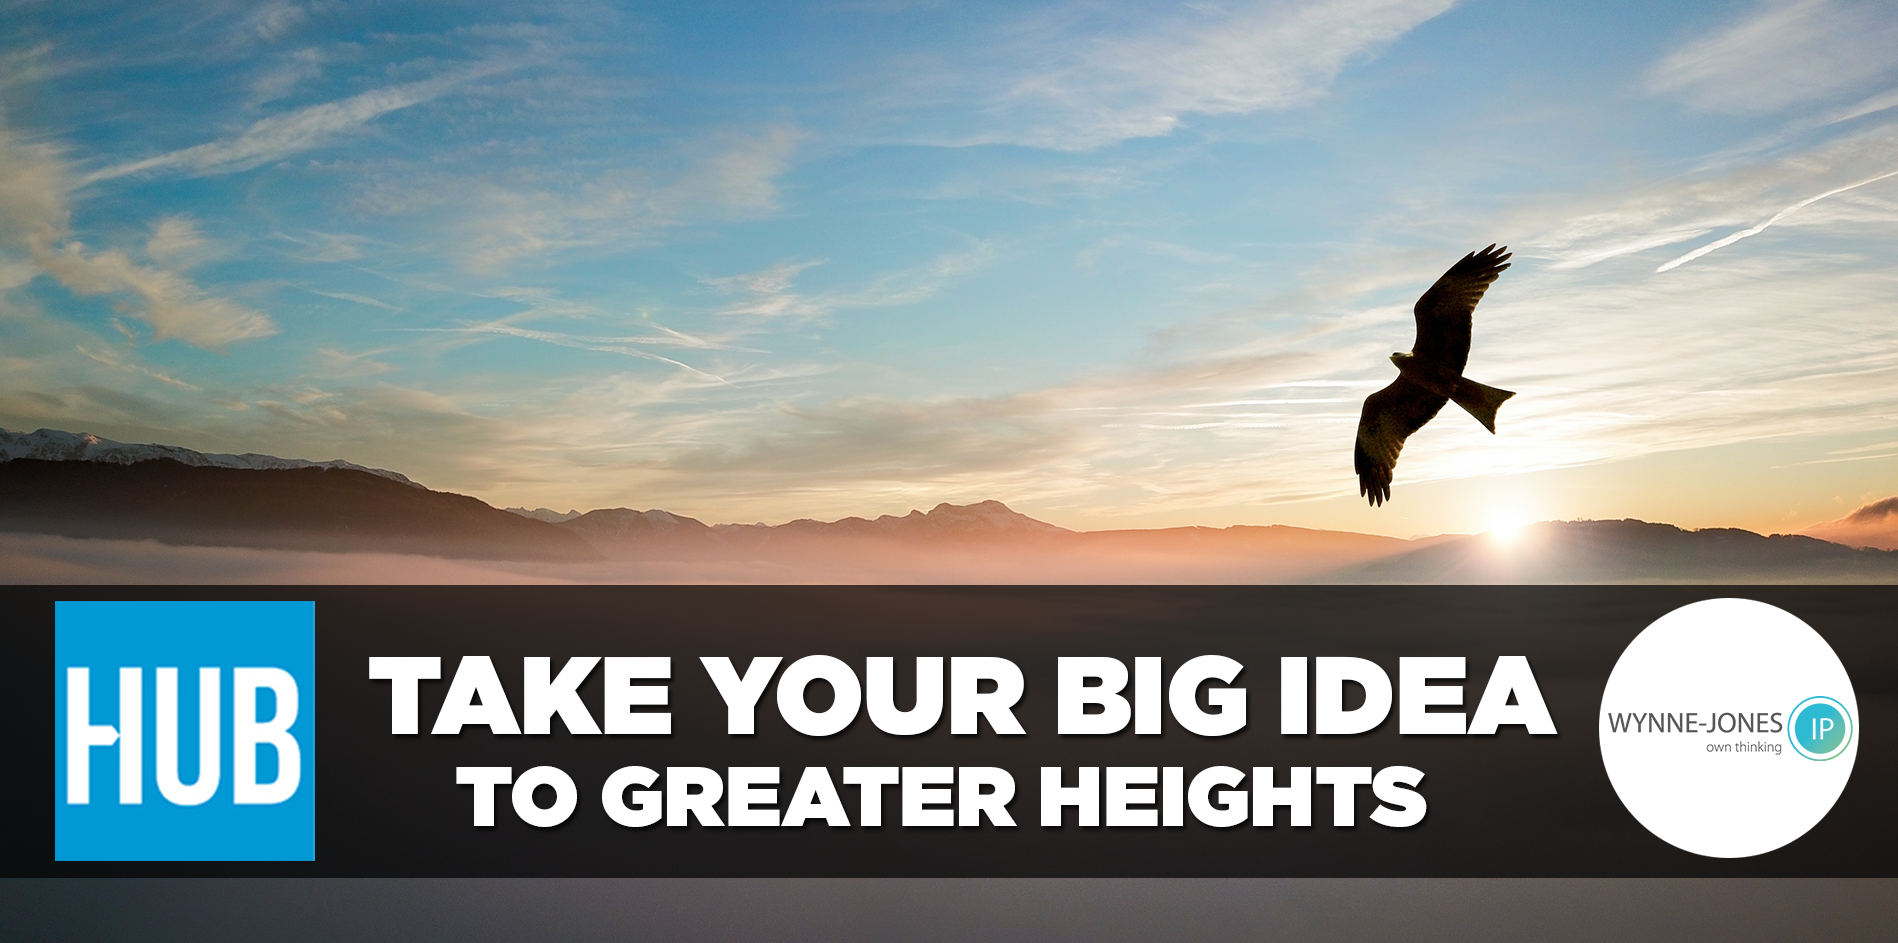 Take your big idea to greater heights Wynne Jones IP